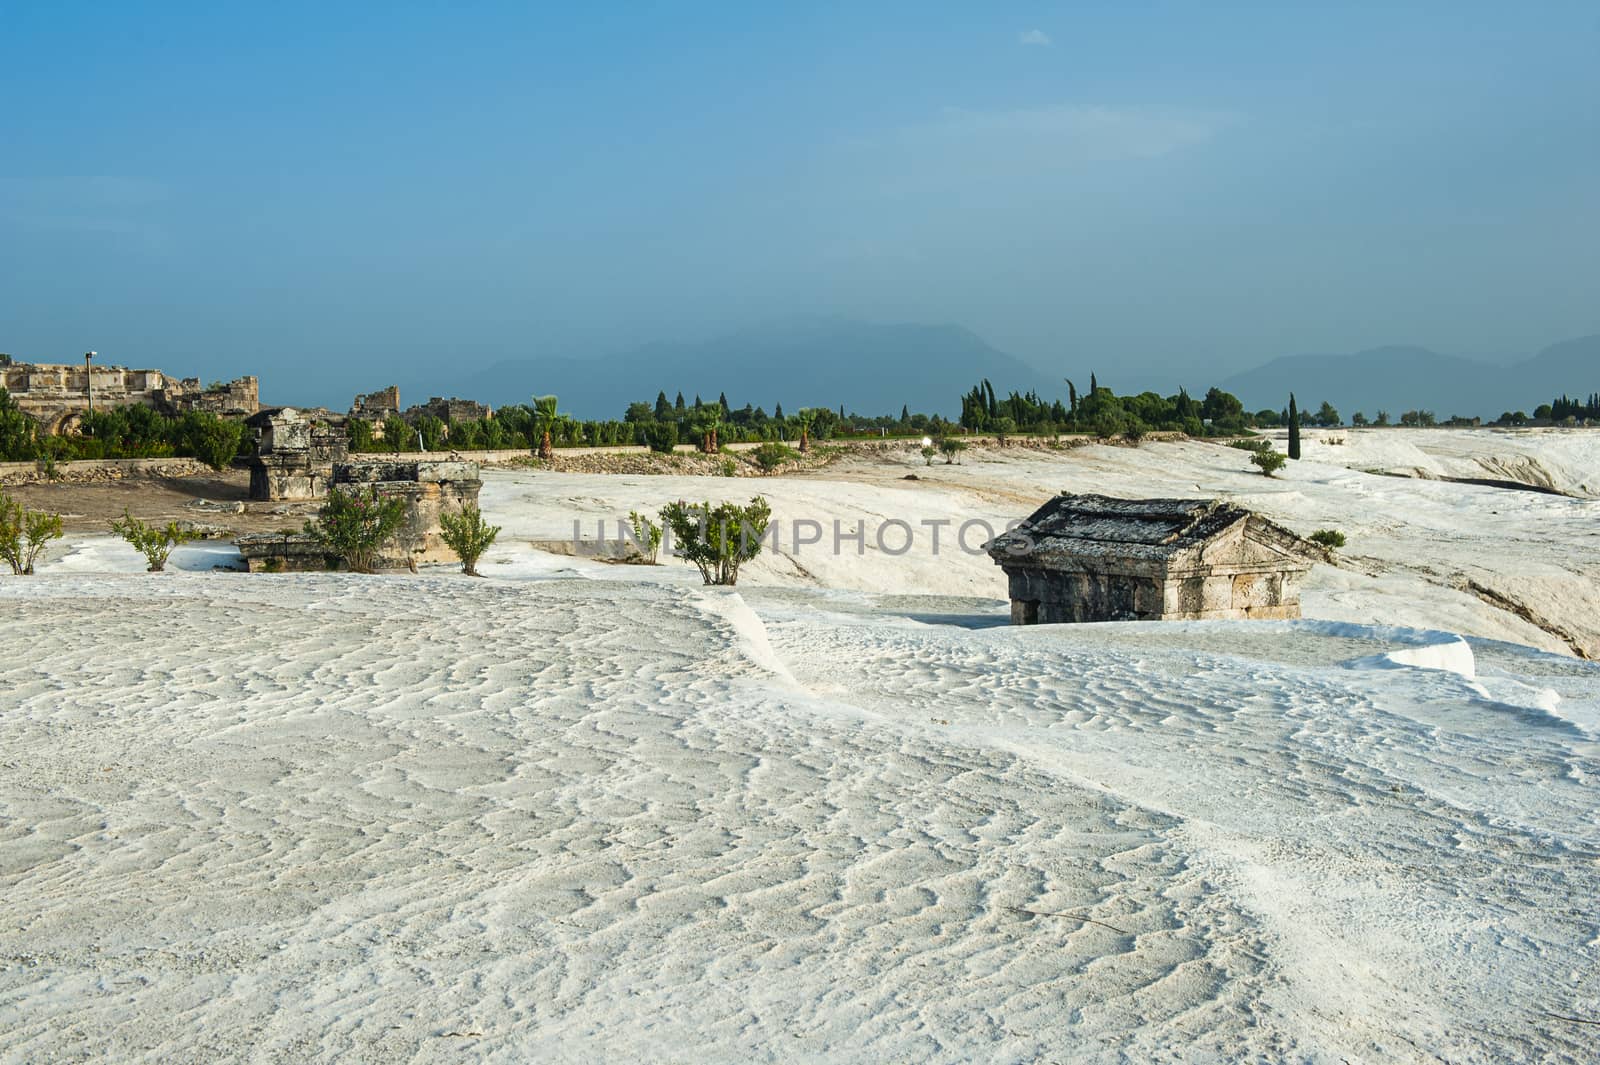 Pamukkale (cotton castle) natural wonder is created by a layers of white travertine looking like cotton, Turkey. There are ancient Roman ruins of Hierapolis nearby